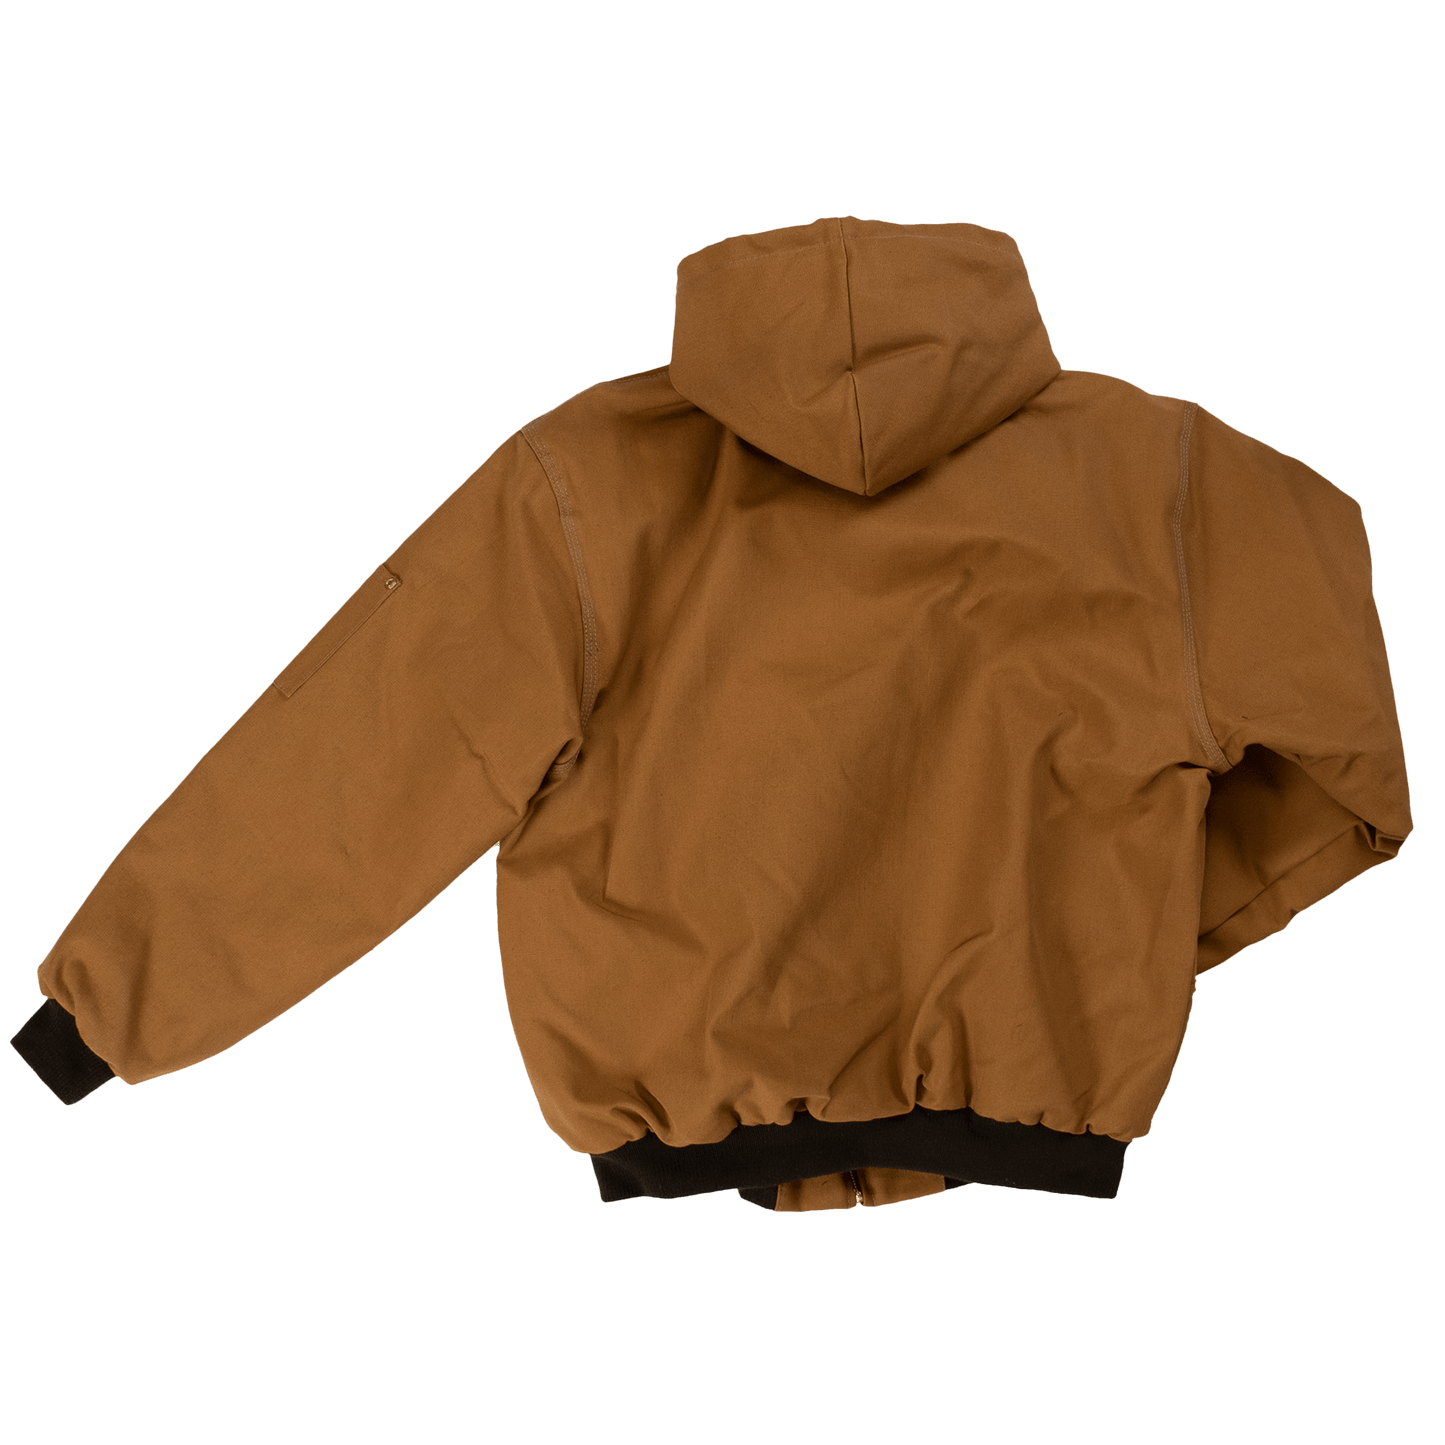 Tough Duck Hooded Bomber Jacket - 5123 - Brown - back